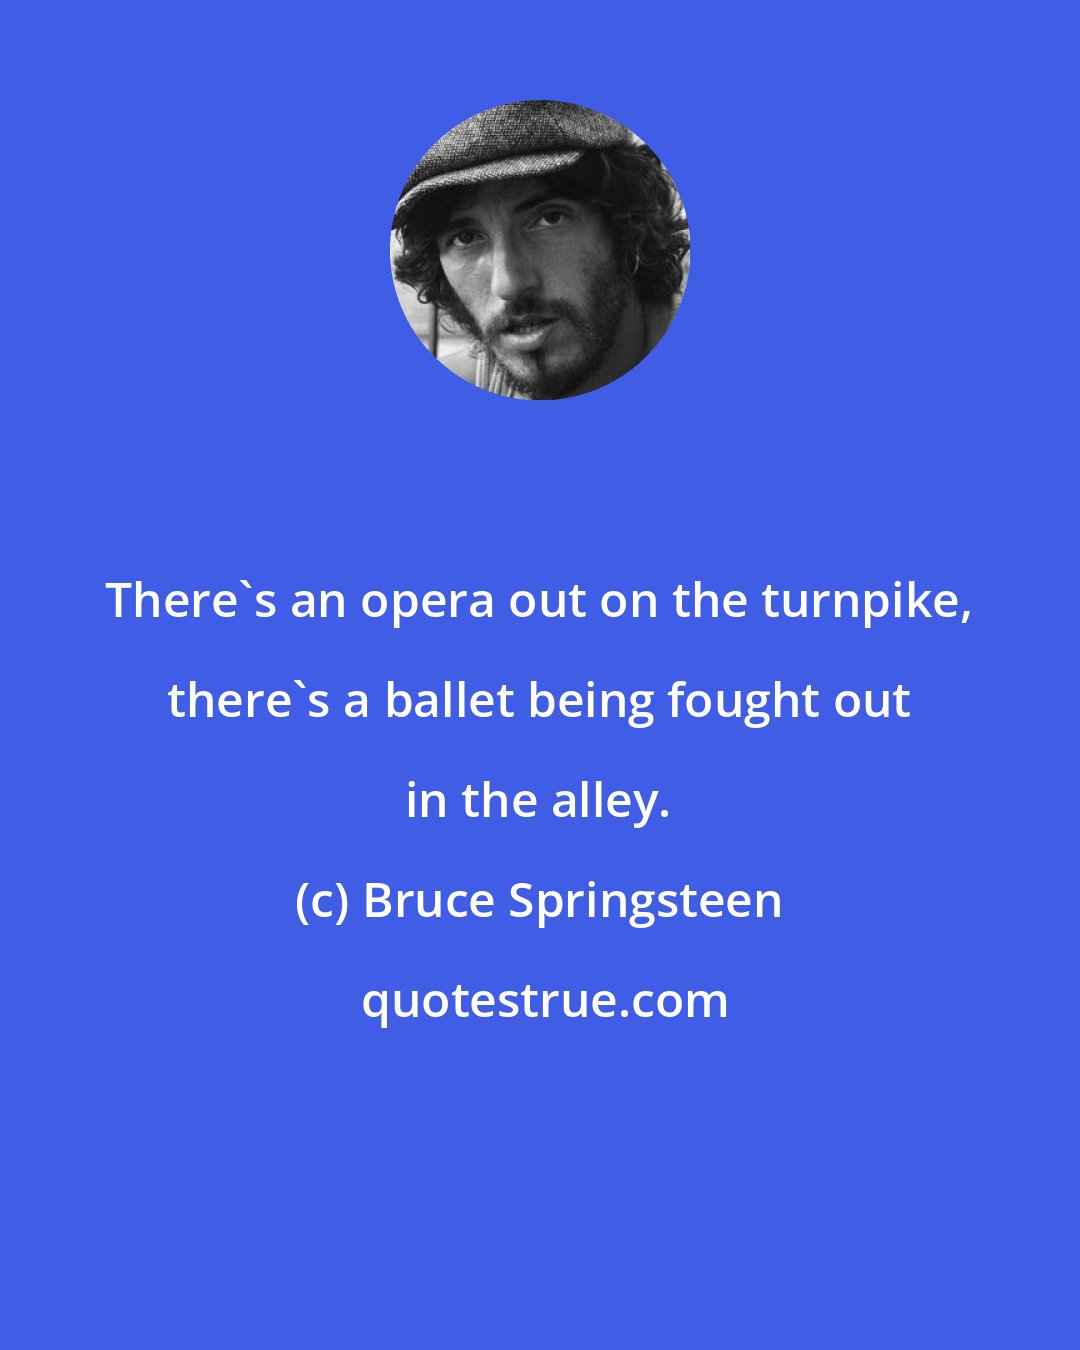 Bruce Springsteen: There's an opera out on the turnpike, there's a ballet being fought out in the alley.